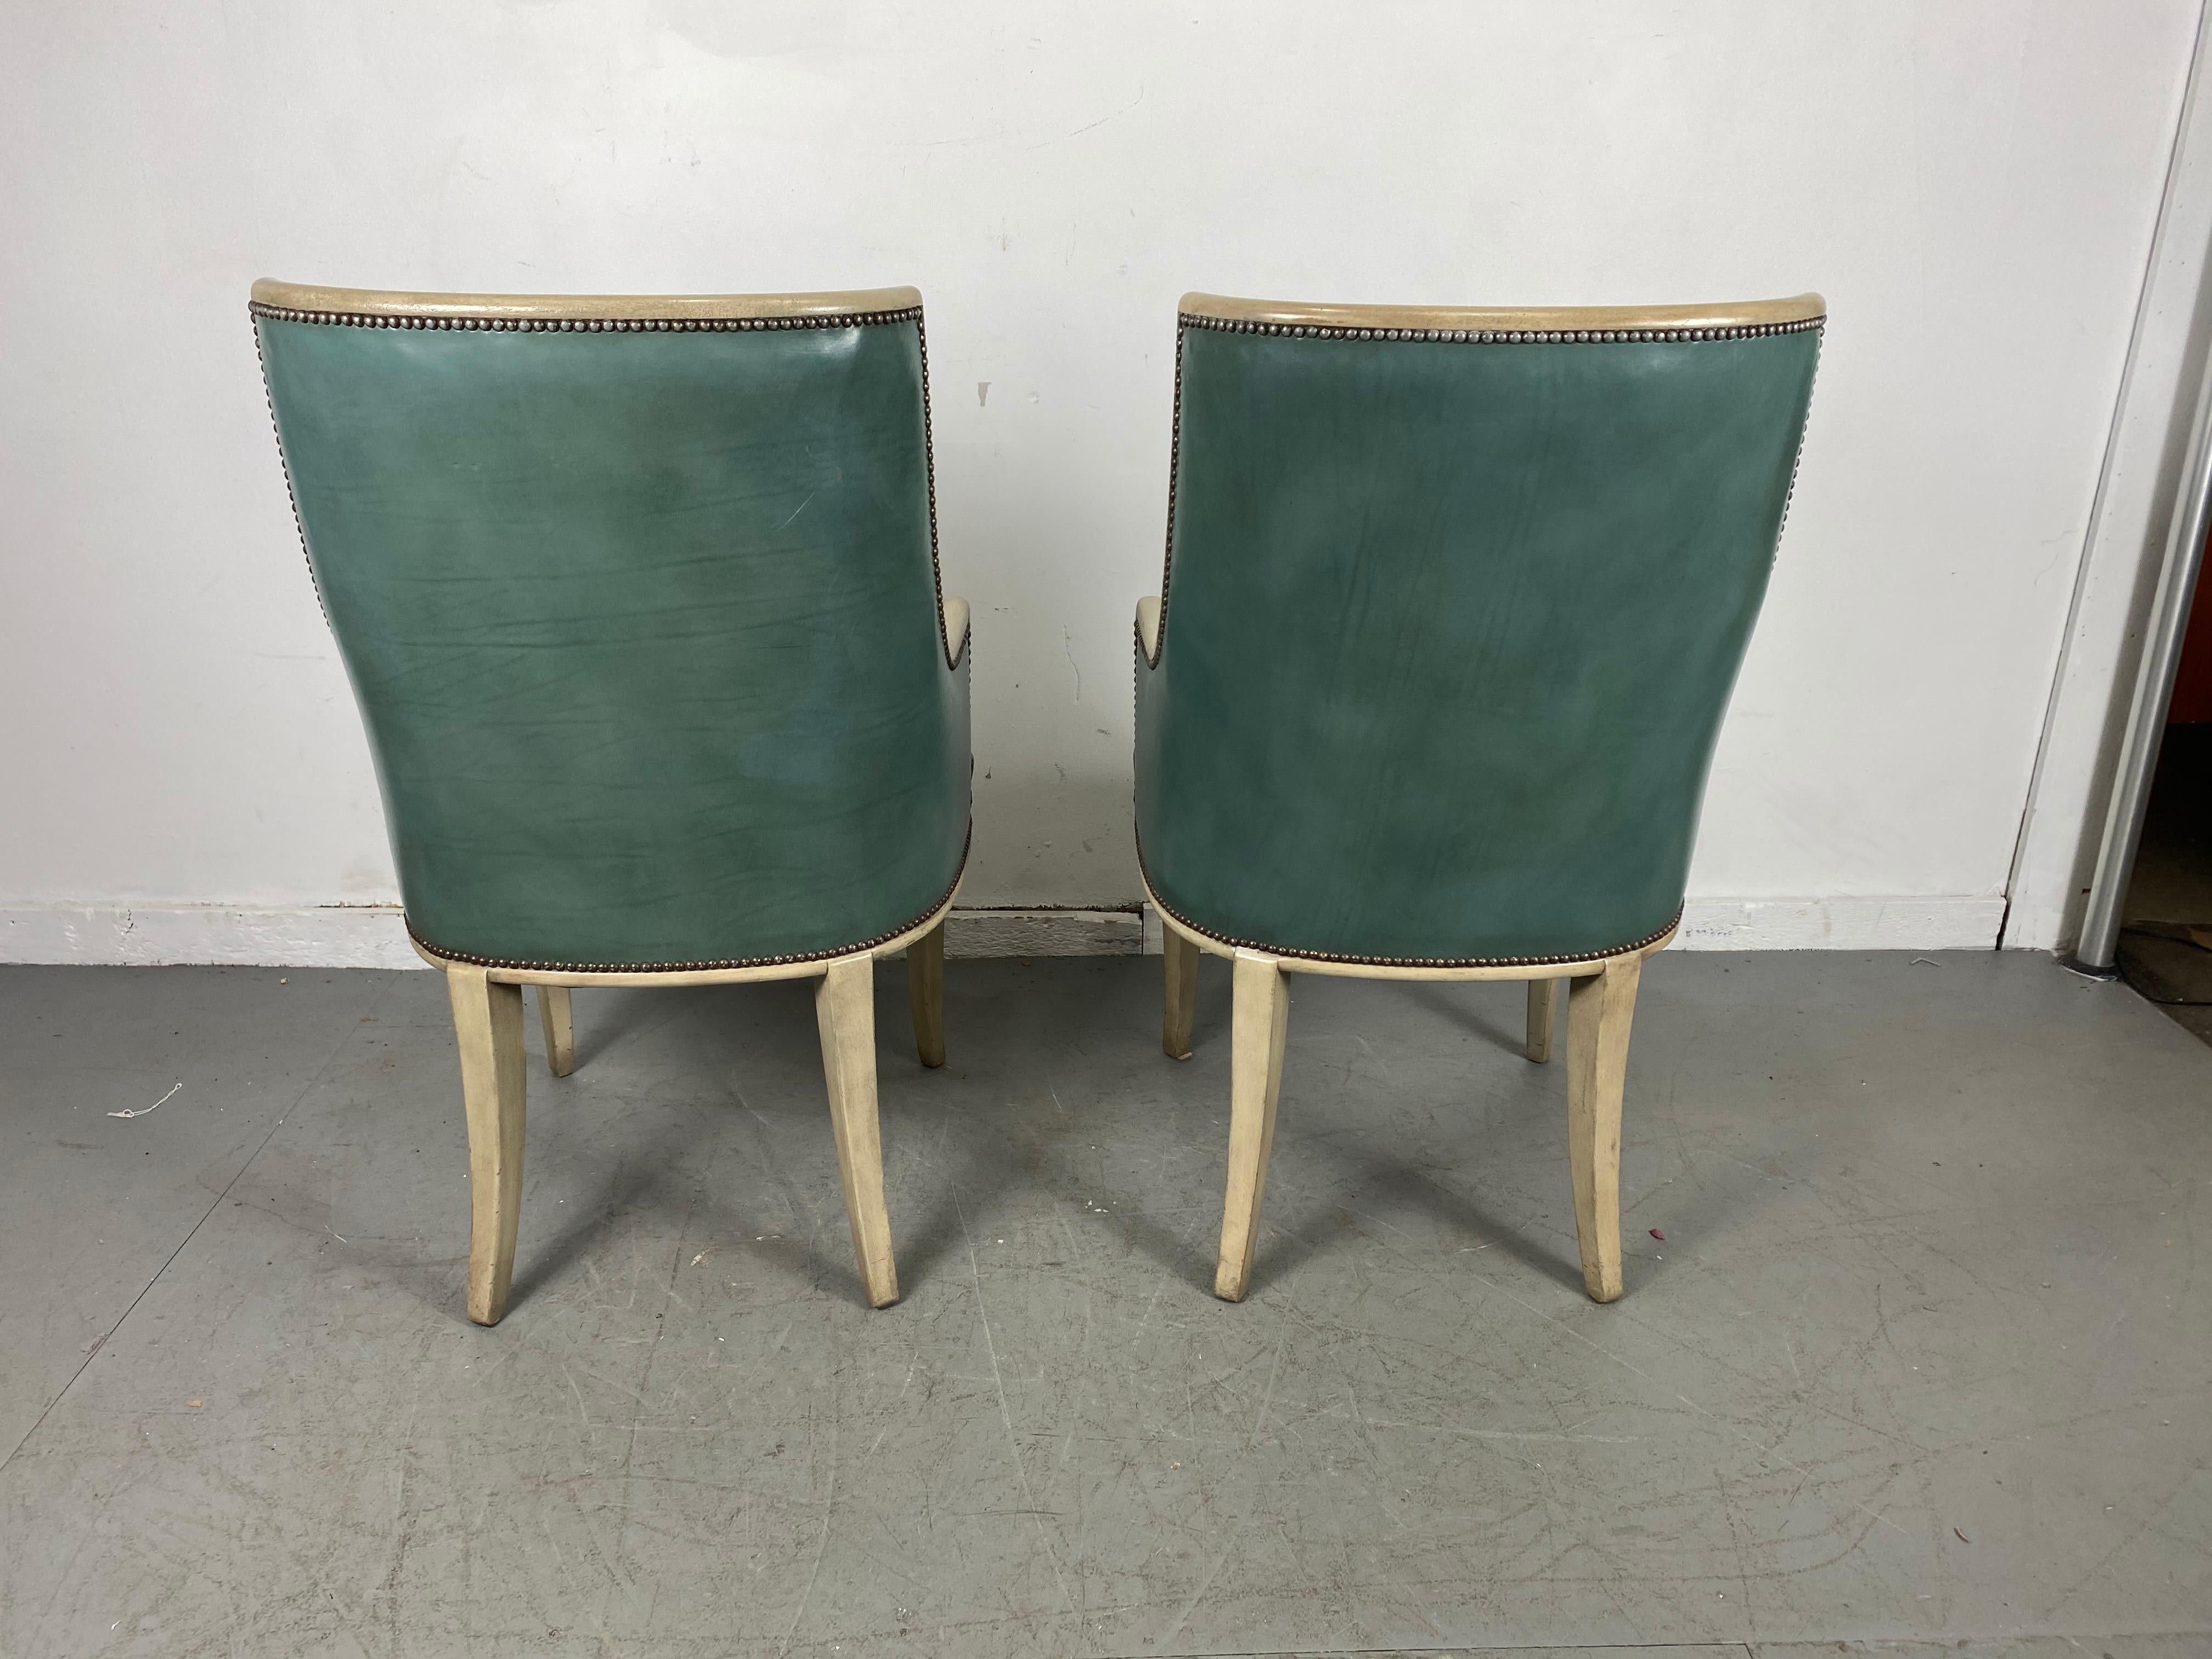 American Pair of Regency Leather Arm / Lounge Chairs, Attributed to Baker Furniture Co